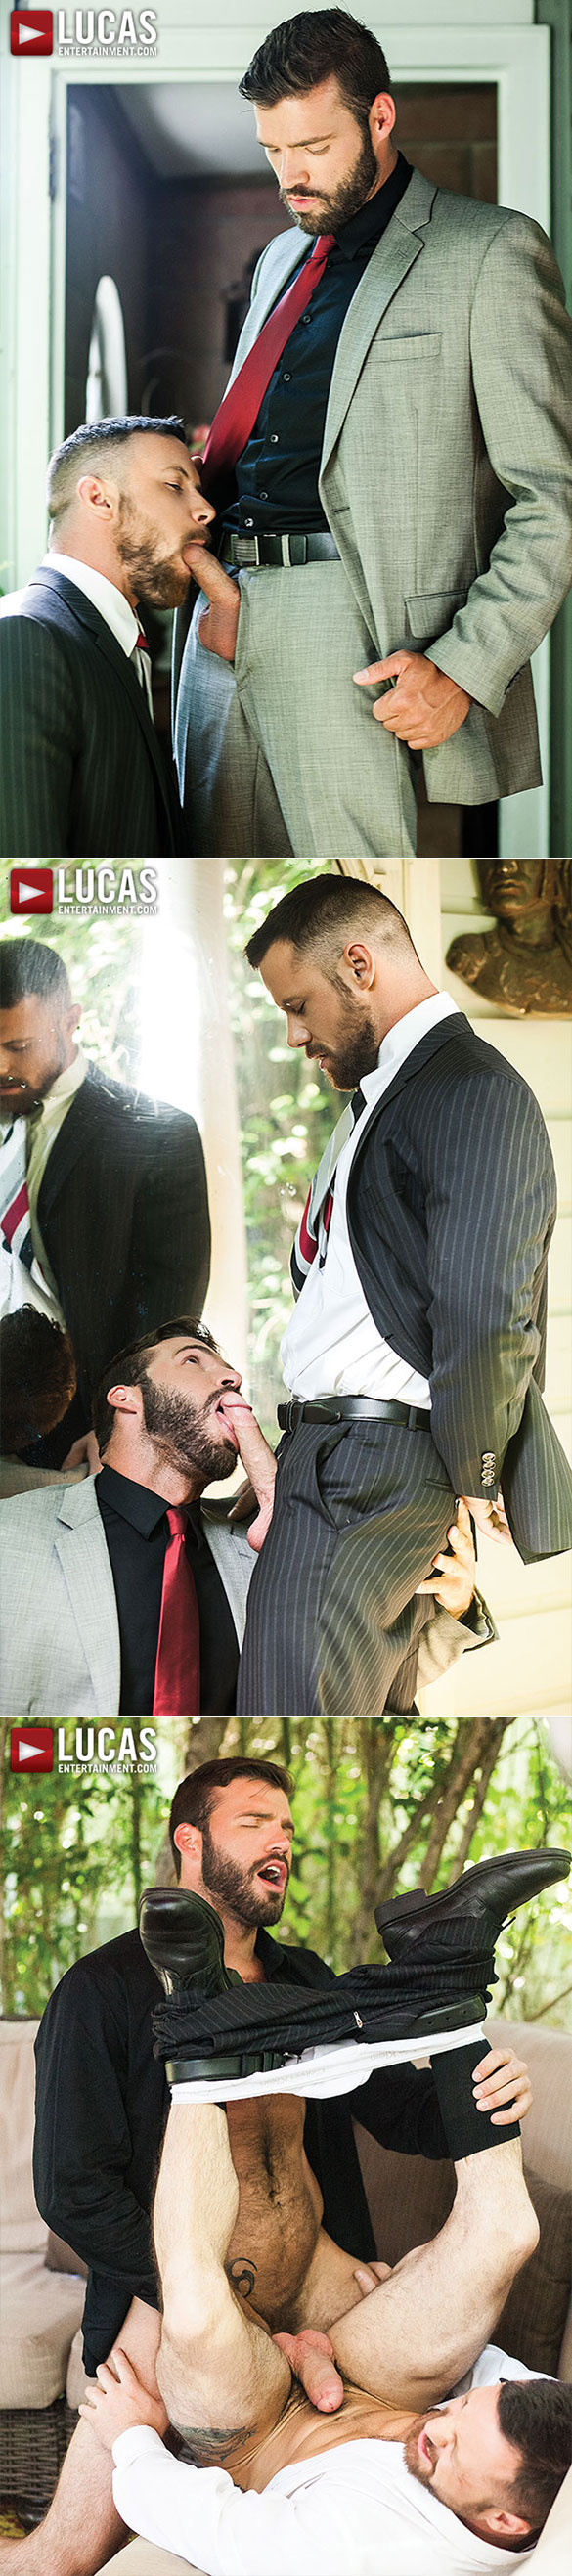 Lucas Entertainment: Xavier Jacobs and Sergeant Miles flip fuck raw in "Gentlemen 15: Suited For Sex"